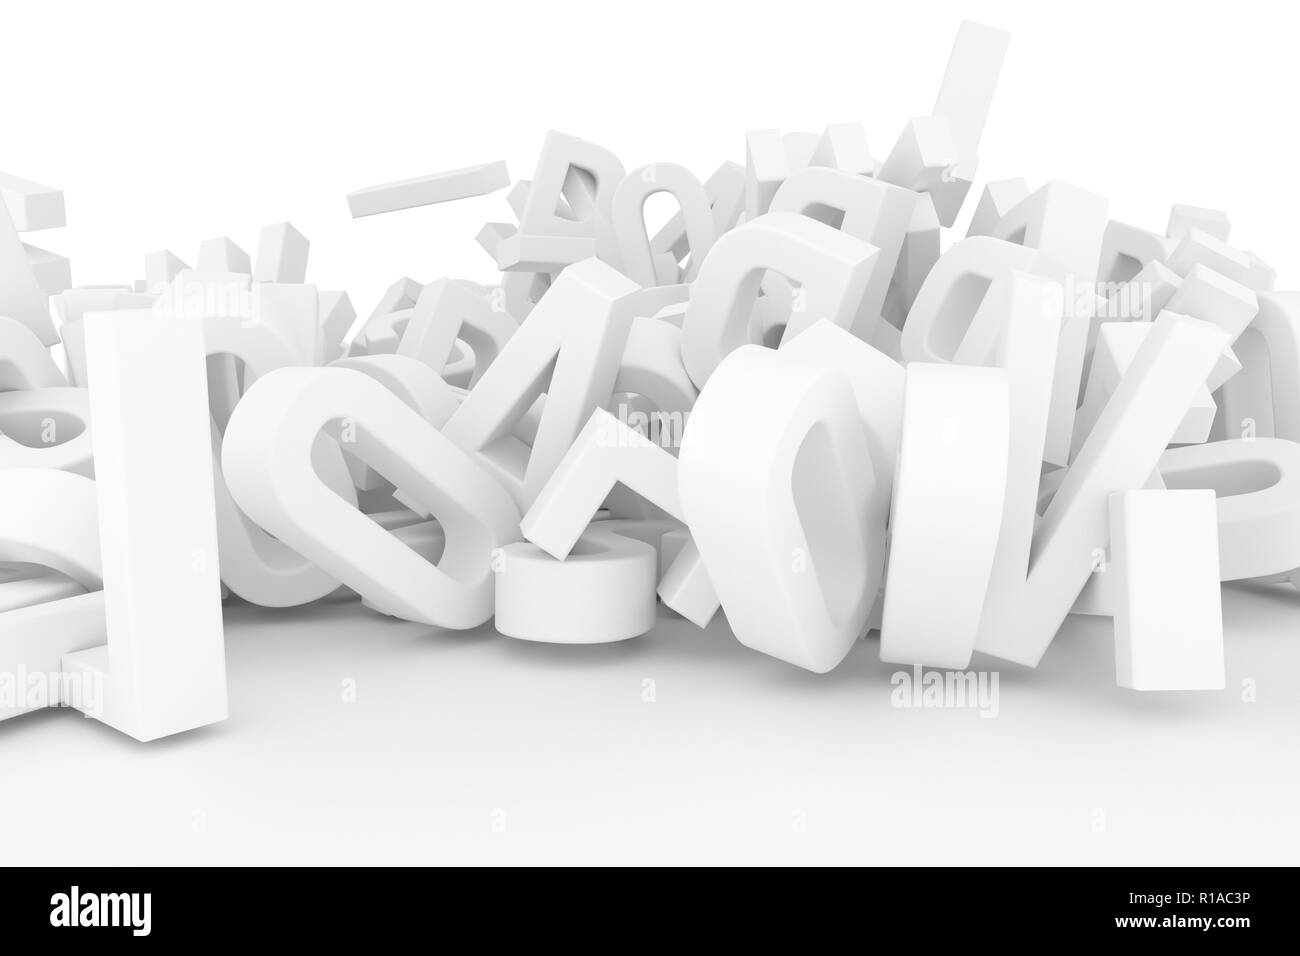 Abstract Cgi Typography Letter Of Abc Alphabet Good For Web